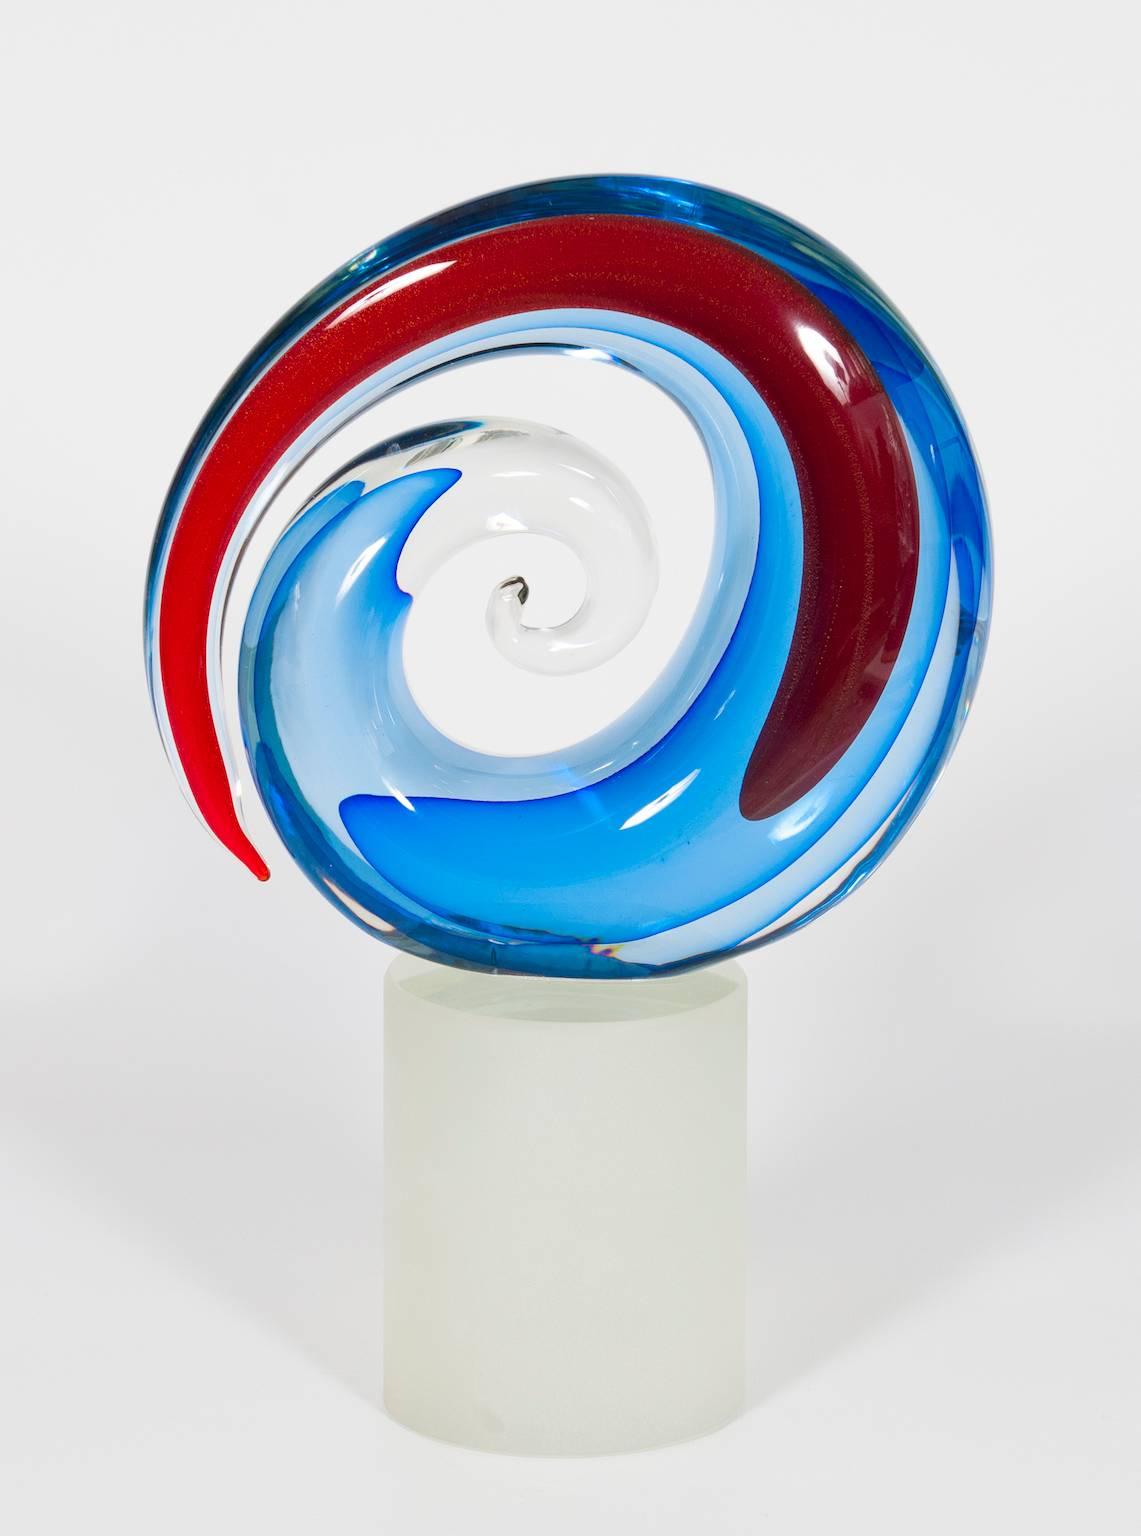 Gorgeous Italian Venetian, Sculpture, Blown Murano Glass, Red Blu and transparent, Signed Romano Donà, 1990s.
This fantastic modern sculpture is entirely handcrafted in blow Murano, made up of a massive basement, and an abstract circular design in